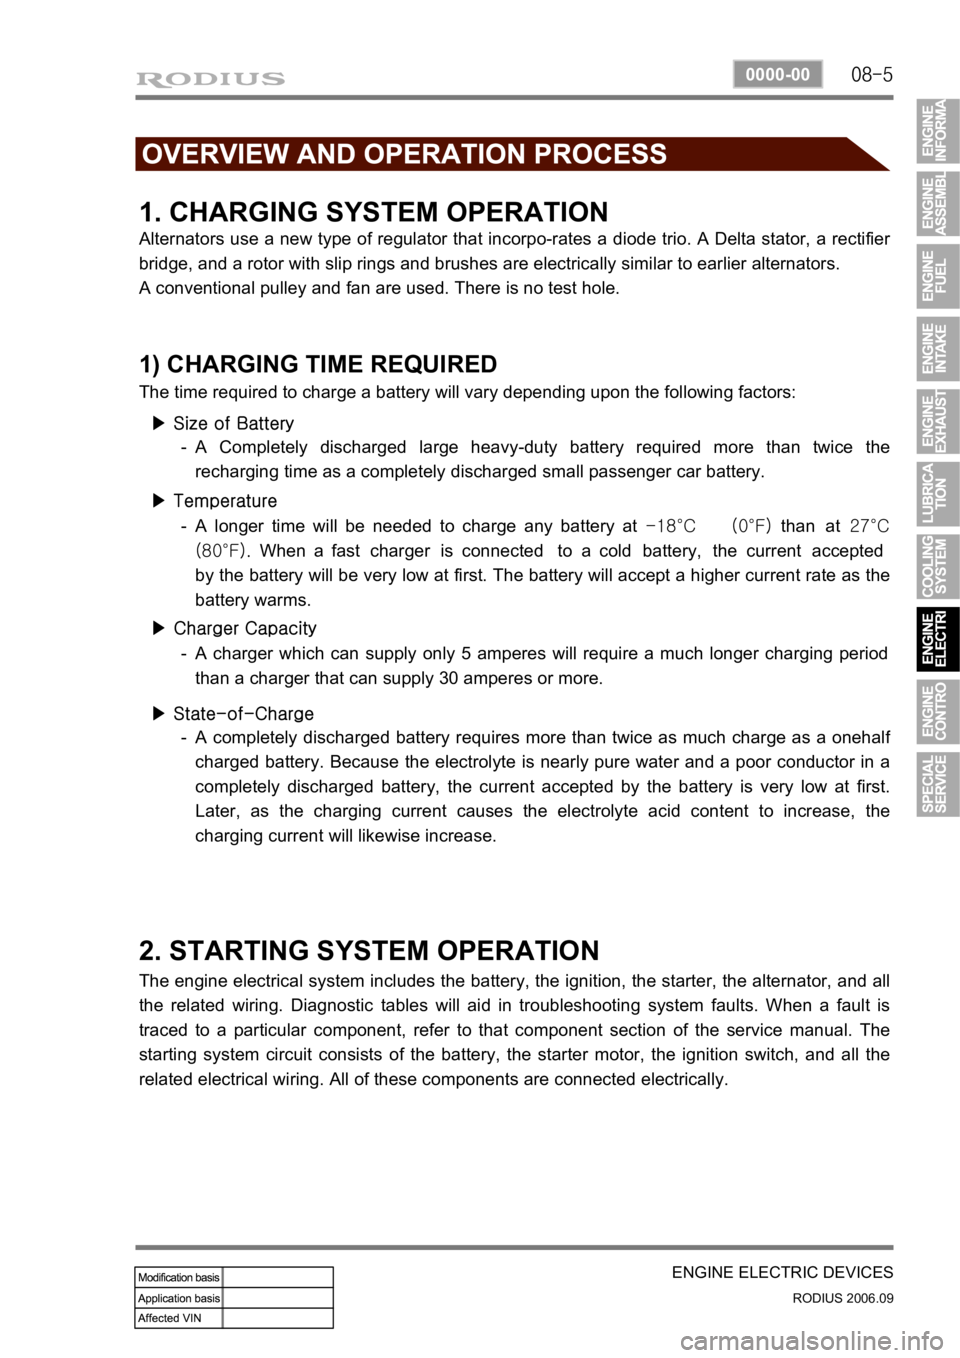 SSANGYONG RODIUS 2007  Service Manual 08-5
ENGINE ELECTRIC DEVICES
RODIUS 2006.09
0000-00
1. CHARGING SYSTEM OPERATION
Alternators use a new type of regulator that incorpo-rates a diode trio. A Delta stator, a rectifier 
bridge, and a rot